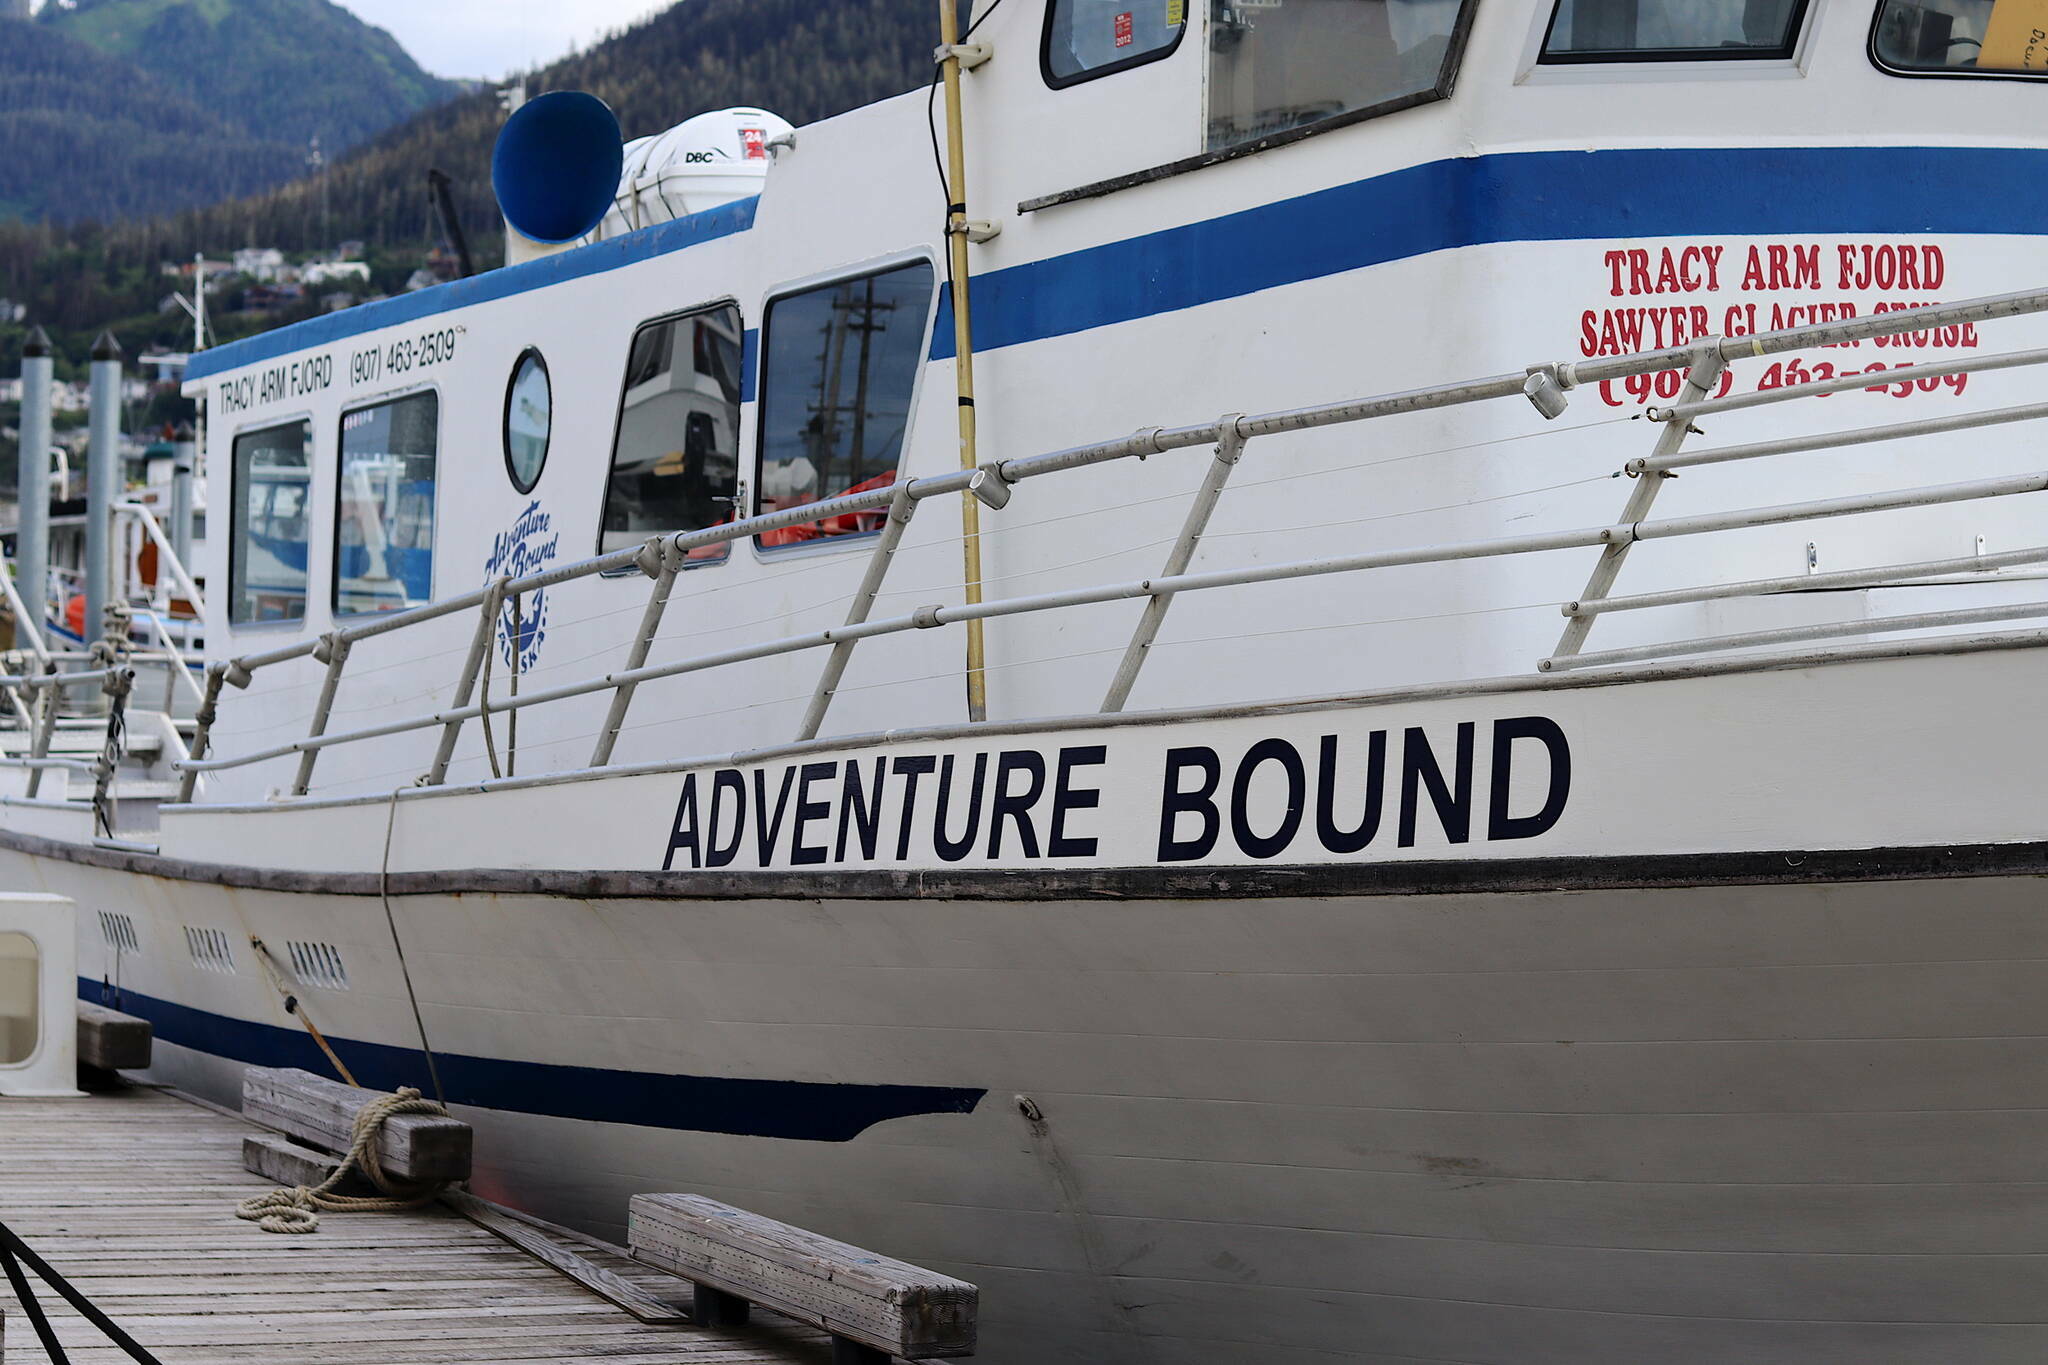 The Adventure Bound tour boat is seen here docked at Aurora Harbor in July. The vessel’s owner-operator was given four notices of deficiencies last year, but continued to operate, according to a U.S. Coast Guard report that also raises questions about the agency’s handling of a grounding incident involving the company. (Meredith Jordan / Juneau Empire File)